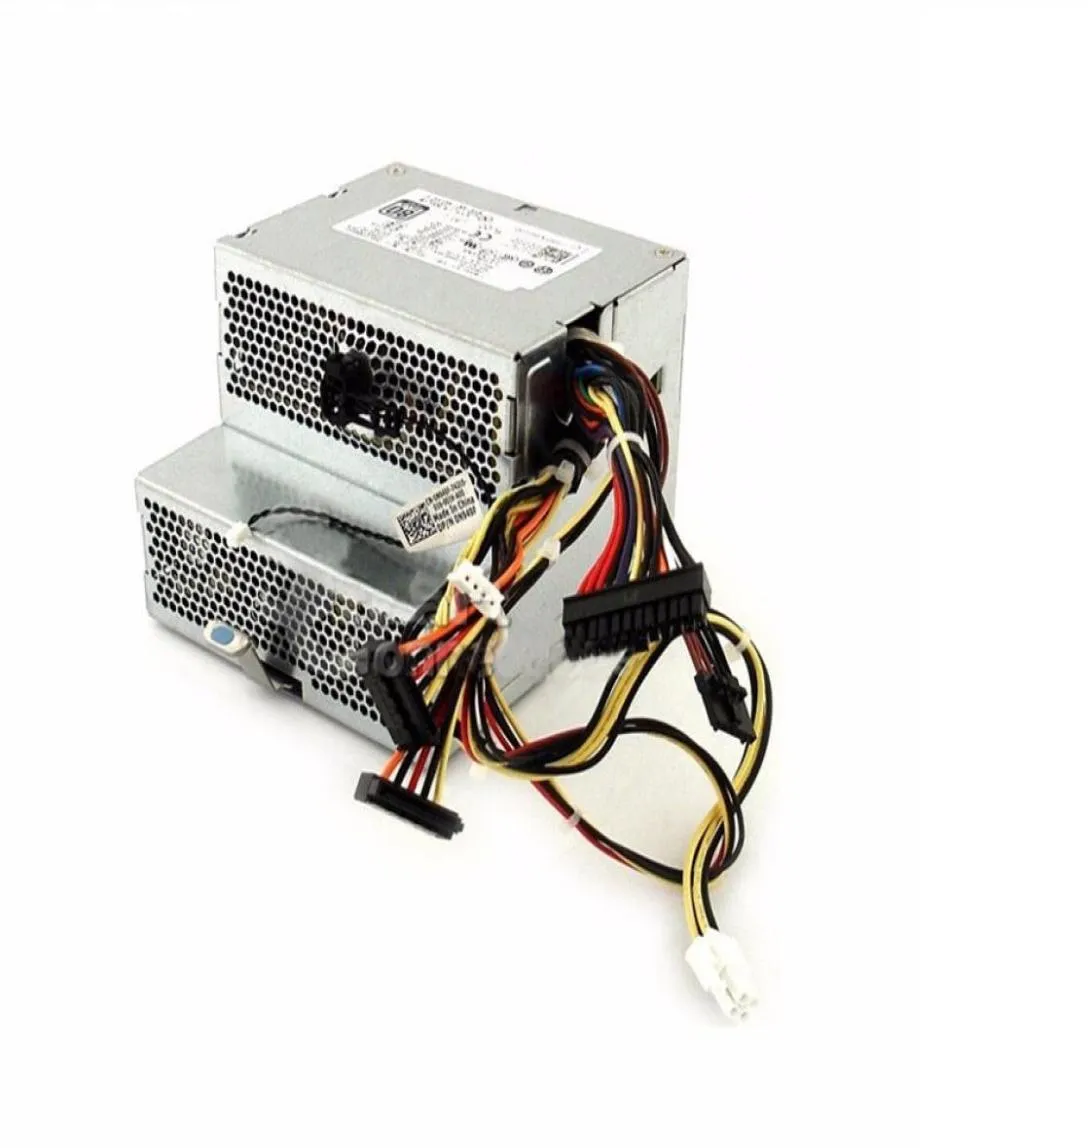 D300ED00 For DELL XE Power Supply DPS300AB48 A 0H197R H197R CN0H197R 300W Perfectly Tested3270300